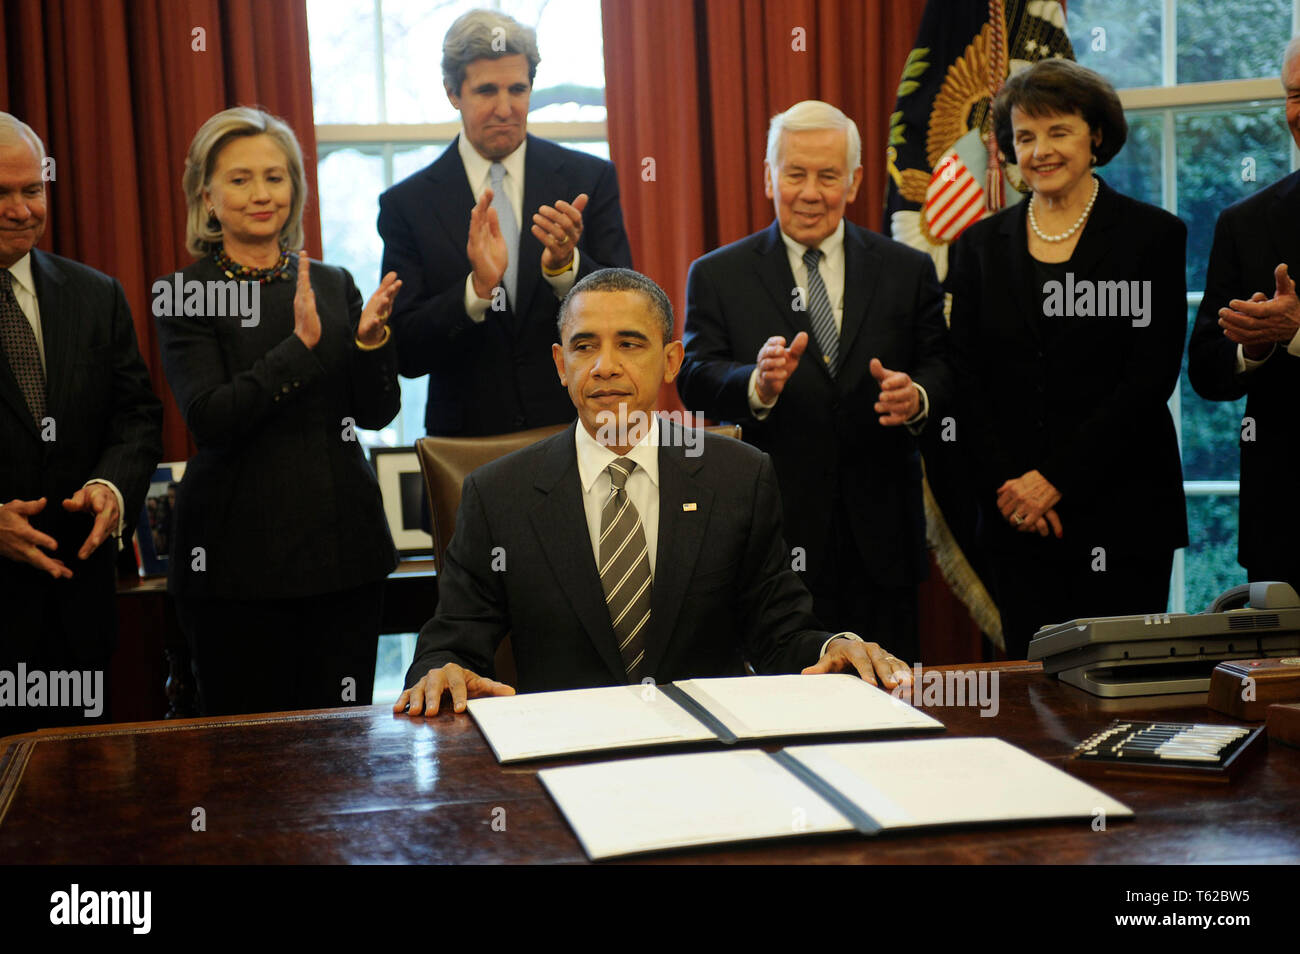 ***FILE PHOTO*** Former Senator Richard Lugar Has Passed Away. United States President Barack Obama signs the New START Treaty during a ceremony in the Oval Office of the White House, with, from left, U.S. Secretary of Defense Robert Gates, U.S. Secretary of State Hillary Rodham Clinton, U.S. Senator John Kerry (Democrat of Massachusetts), U.S. Senator Richard Lugar (Republican of Indiana), U.S. Senator Dianne Feinstein (Democrat of California). Credit: Leslie E. Kossoff/Pool via CNP /MediaPunch Stock Photo